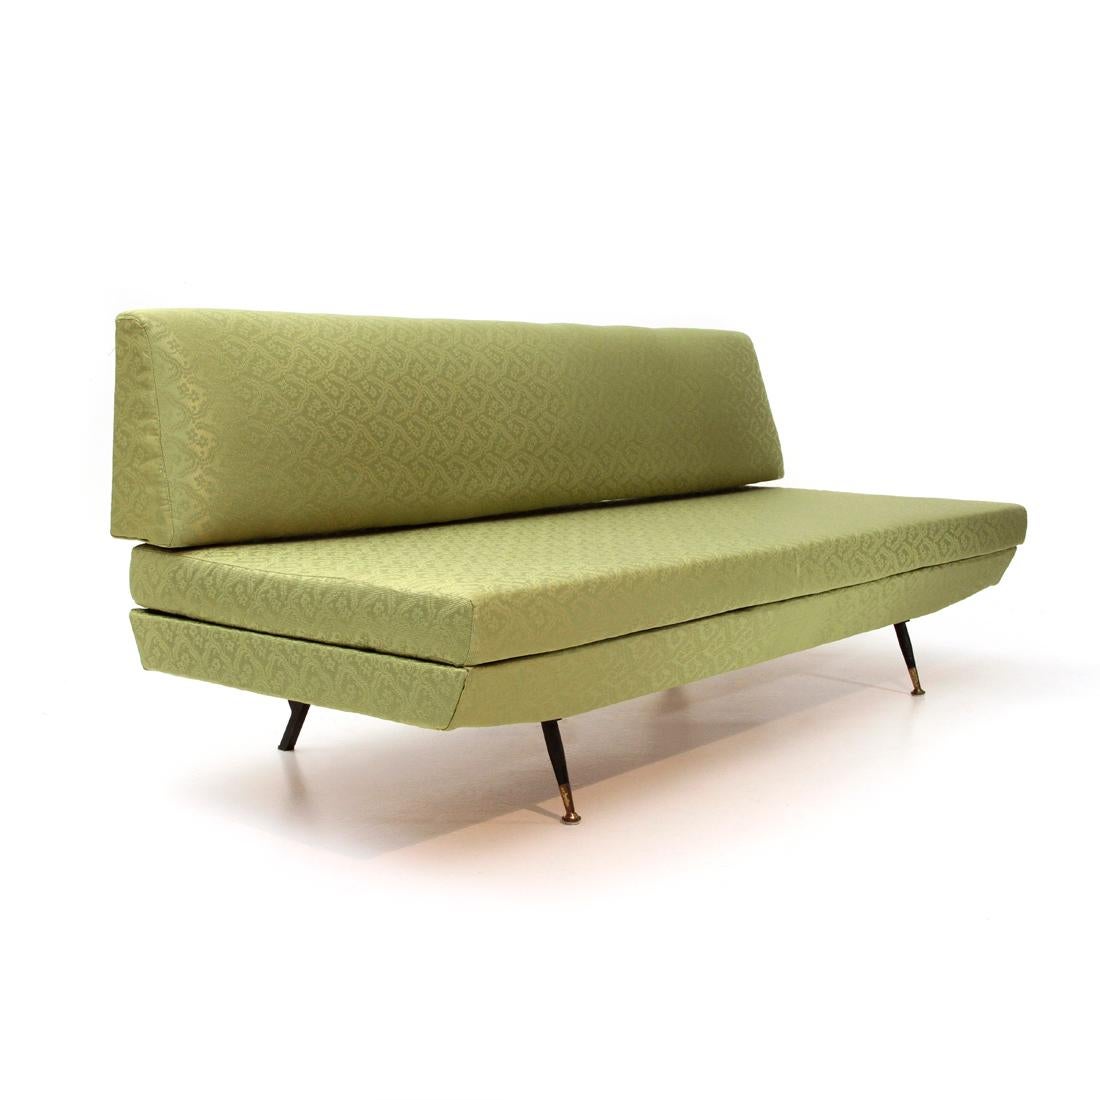 Italian manufacturing sofa bed produced in the 1950s.
Structure in black painted metal.
Seat and back in wood, padded and lined with new green iridescent fabric.
Adjustable metal bedsprings in different positions.
Cushion with new padding and